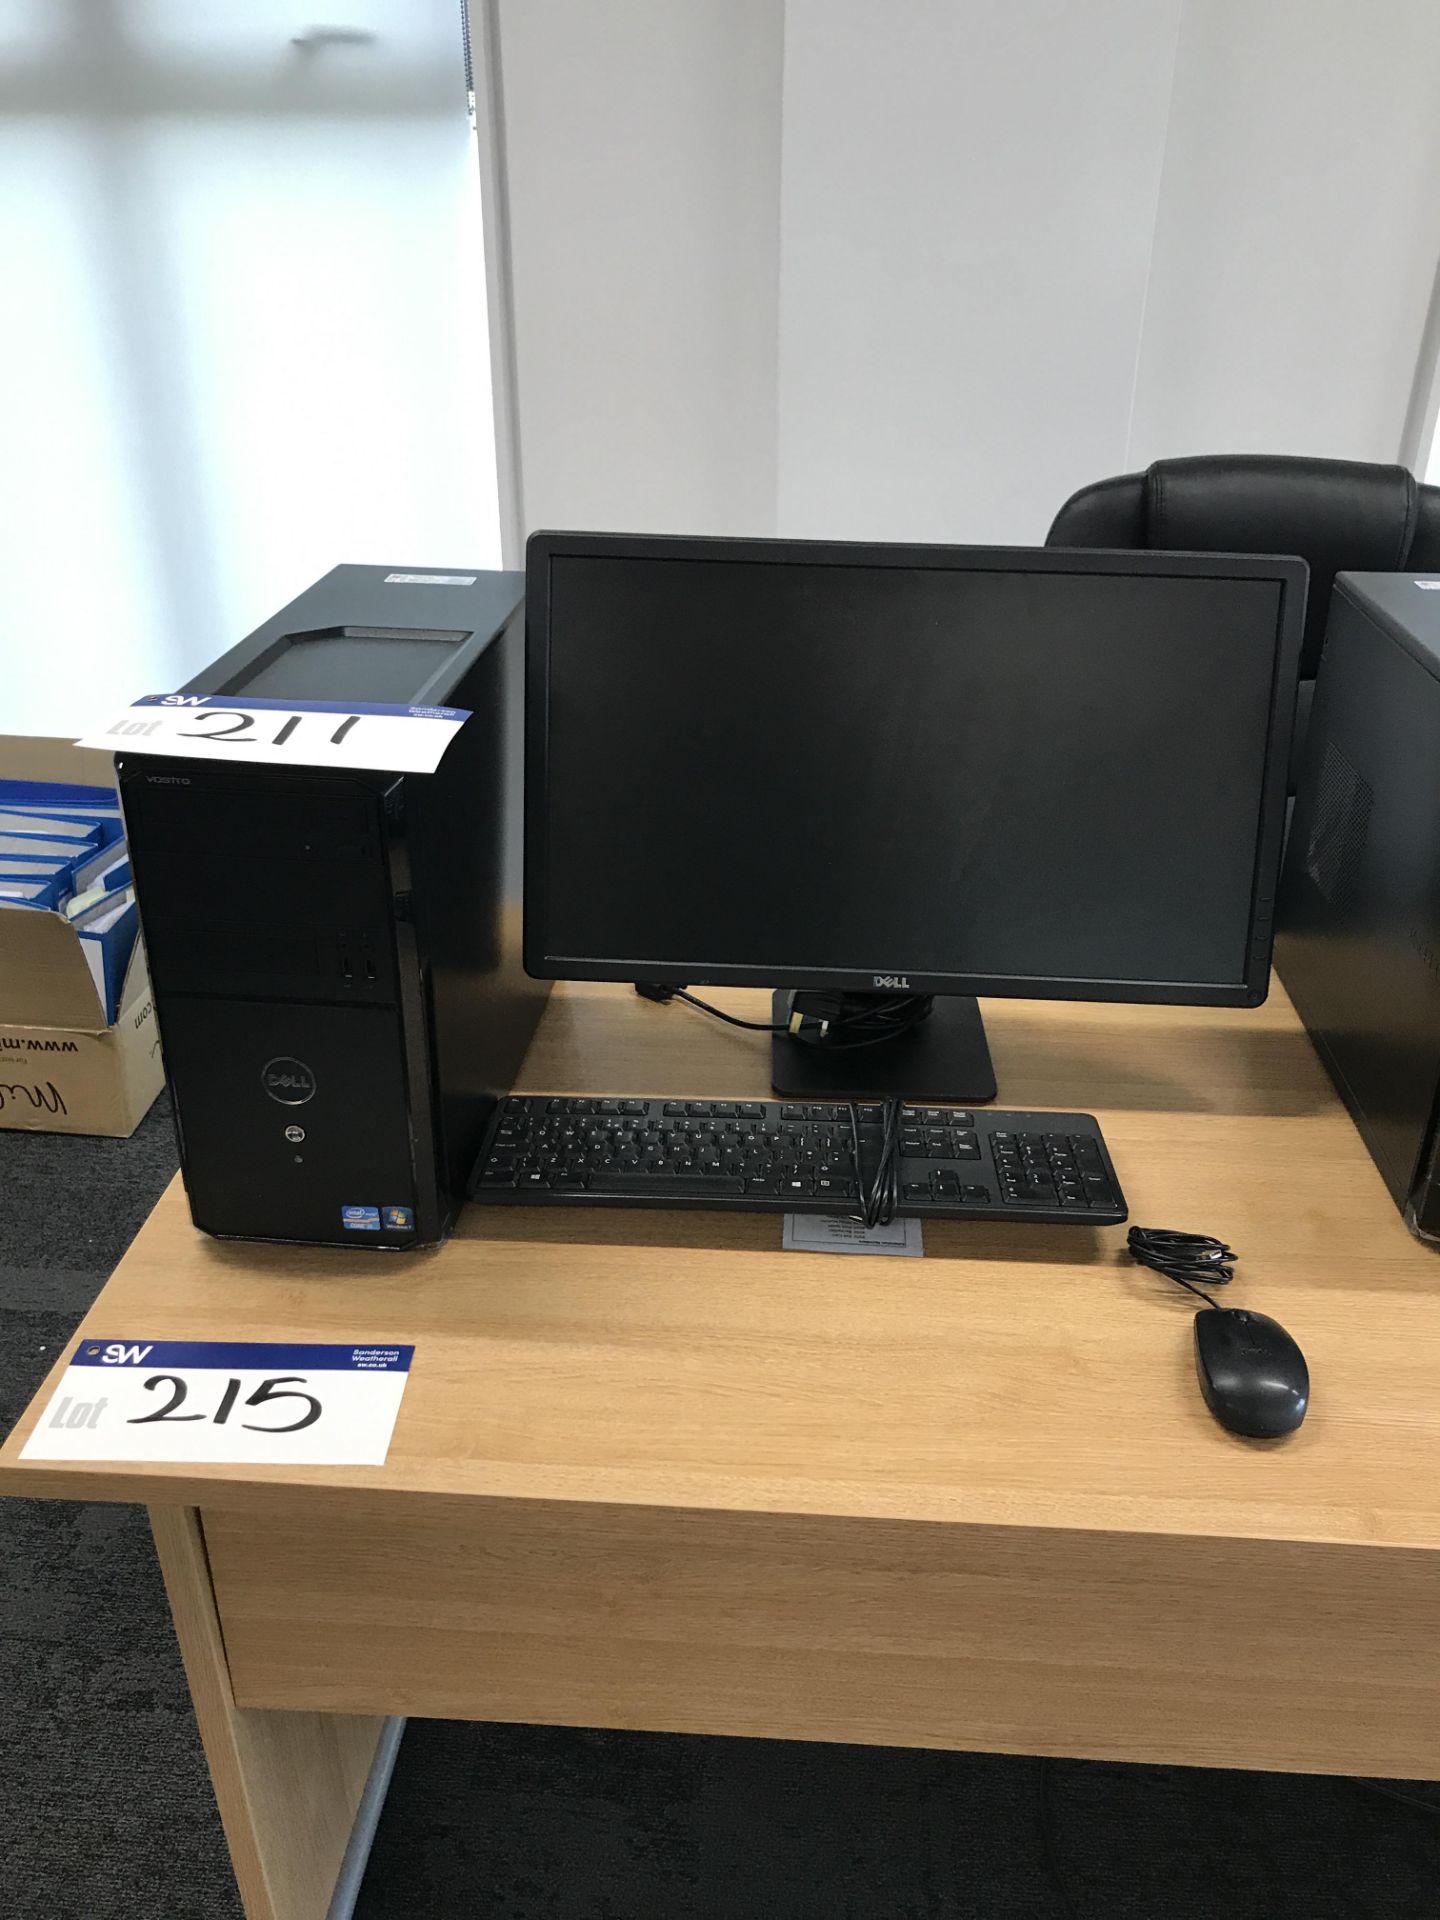 Dell Vostro Intel Core i3 Personal Computer, with flat screen monitor, keyboard and mouse (hard disk